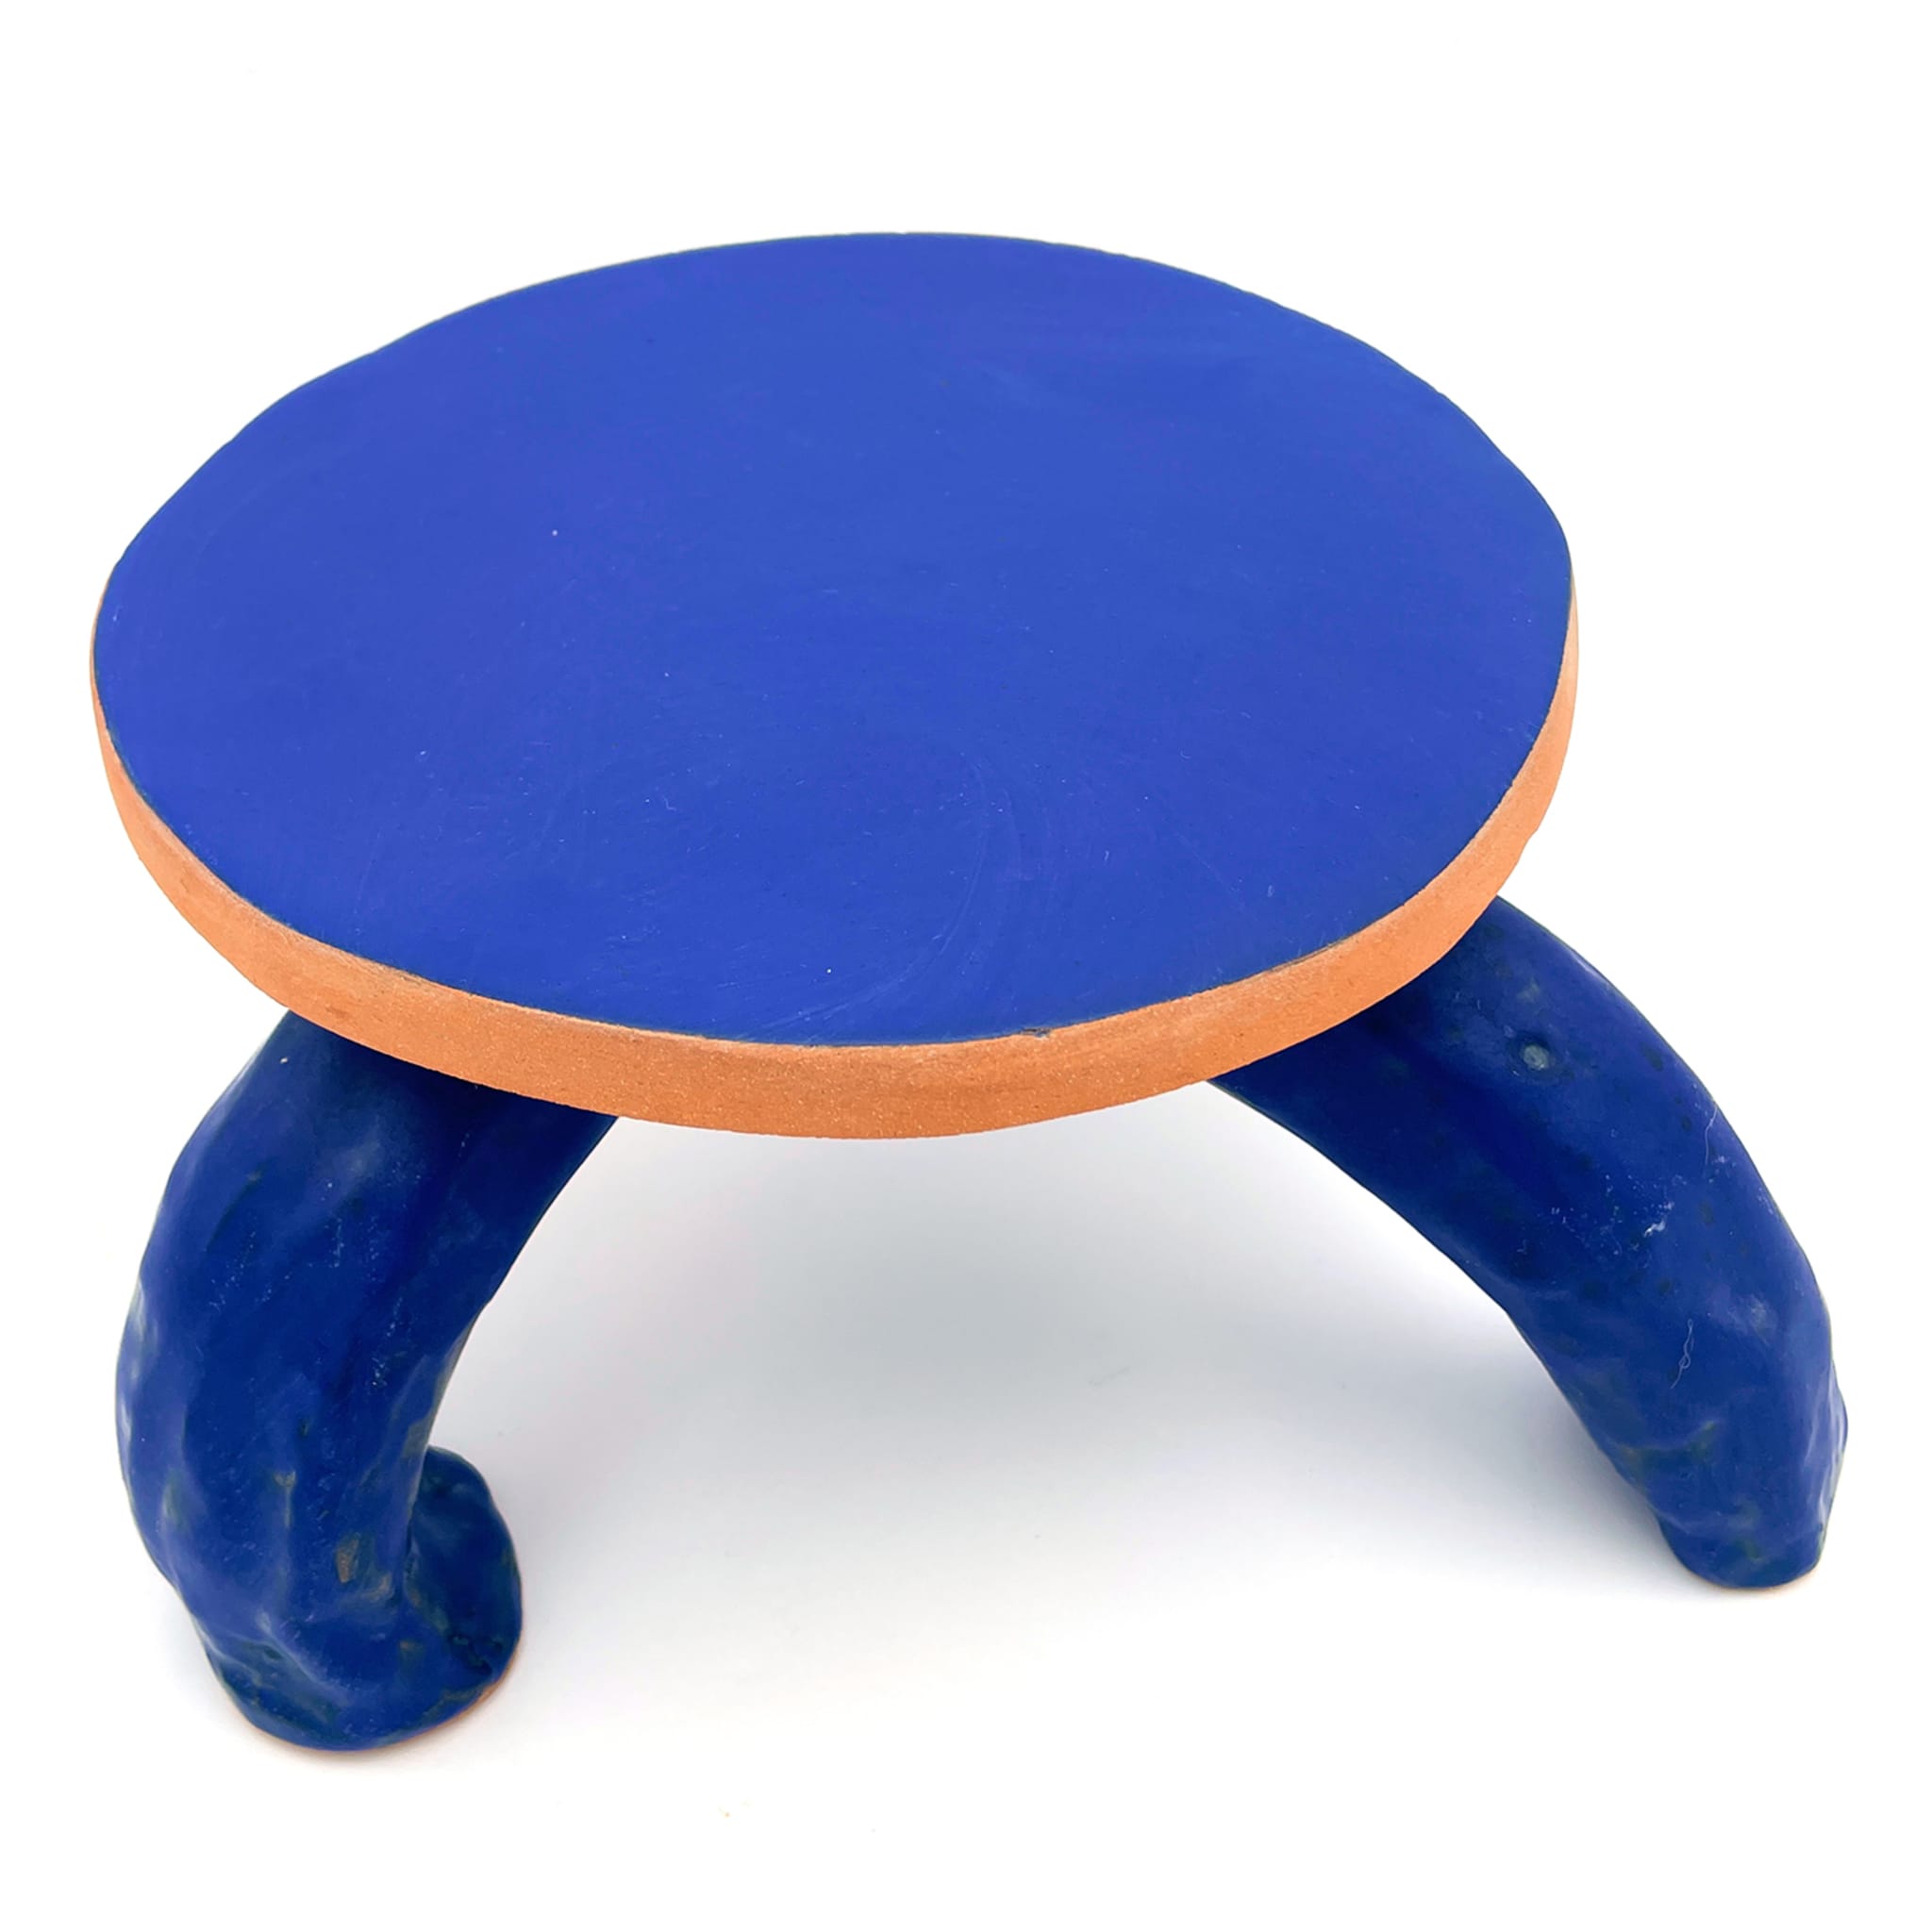 Fungo 3-legged Egyptian Blue and Matte Blue Cake Stand - Alternative view 1